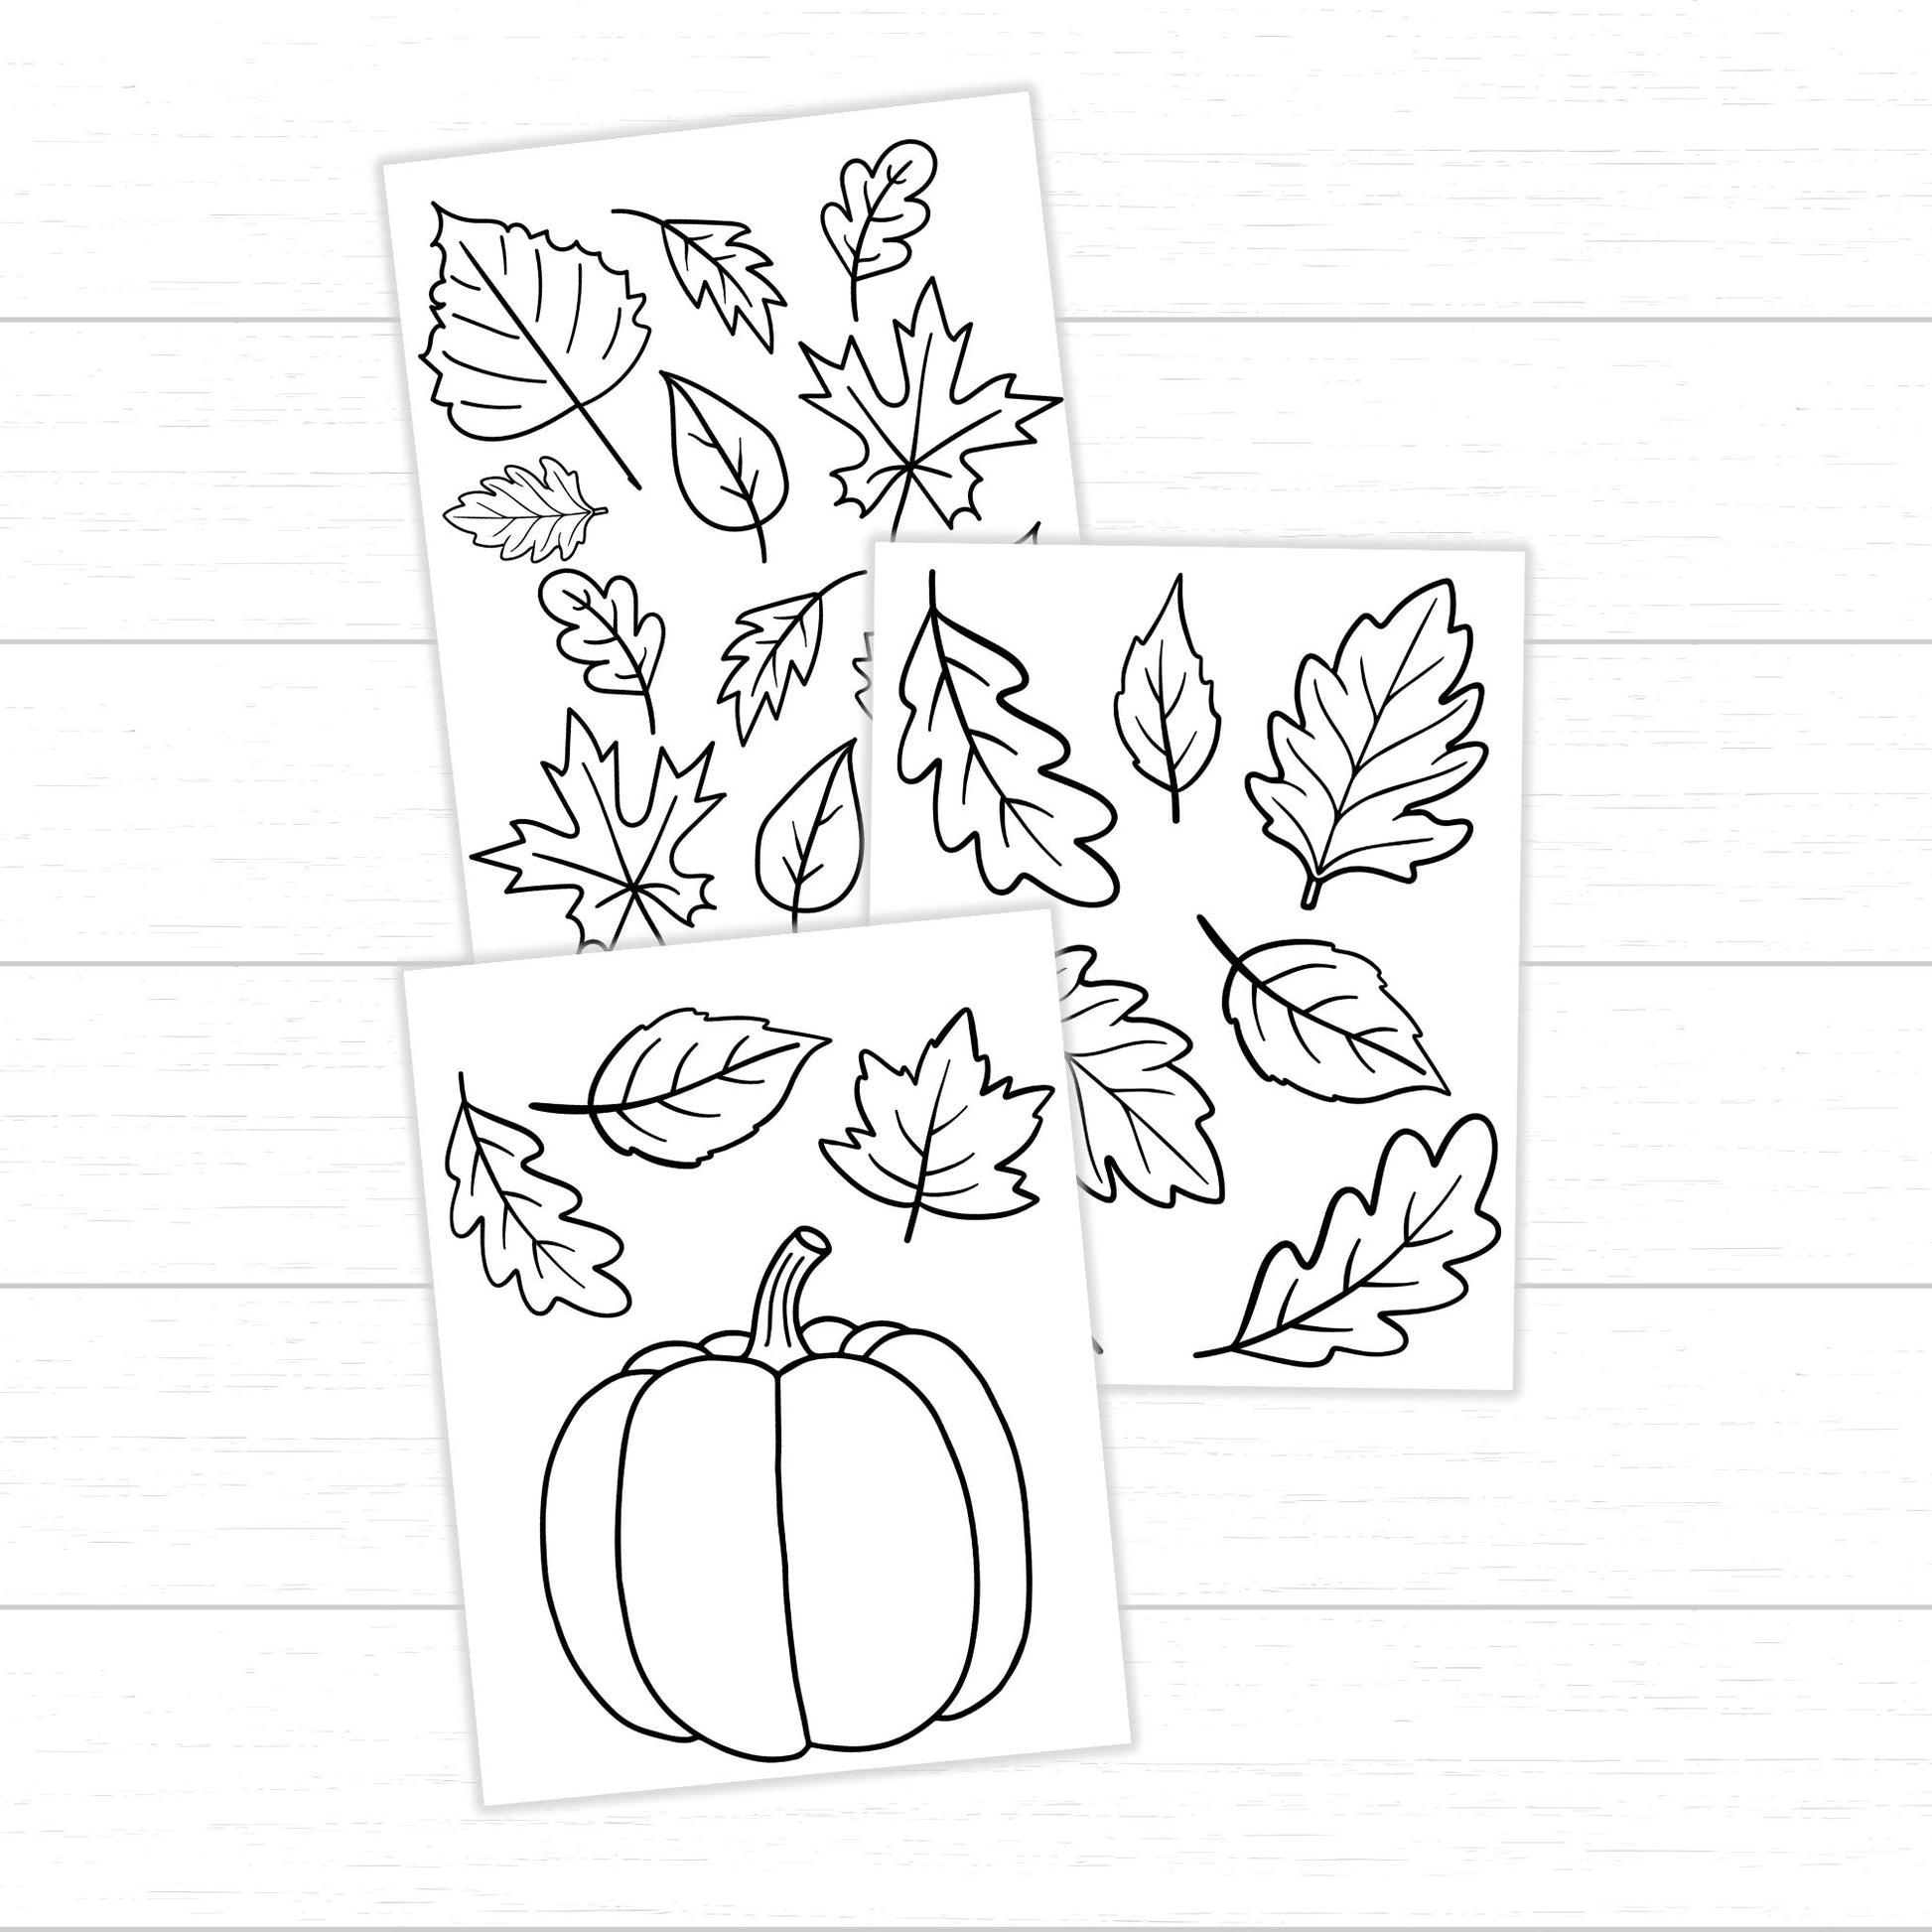 Fall Leaf Coloring Pages, Fall Leaf Activities, Fall Leaf Activity Pack, Fall Printables for Kids, Fall Worksheets, Leaf Activities for Fall